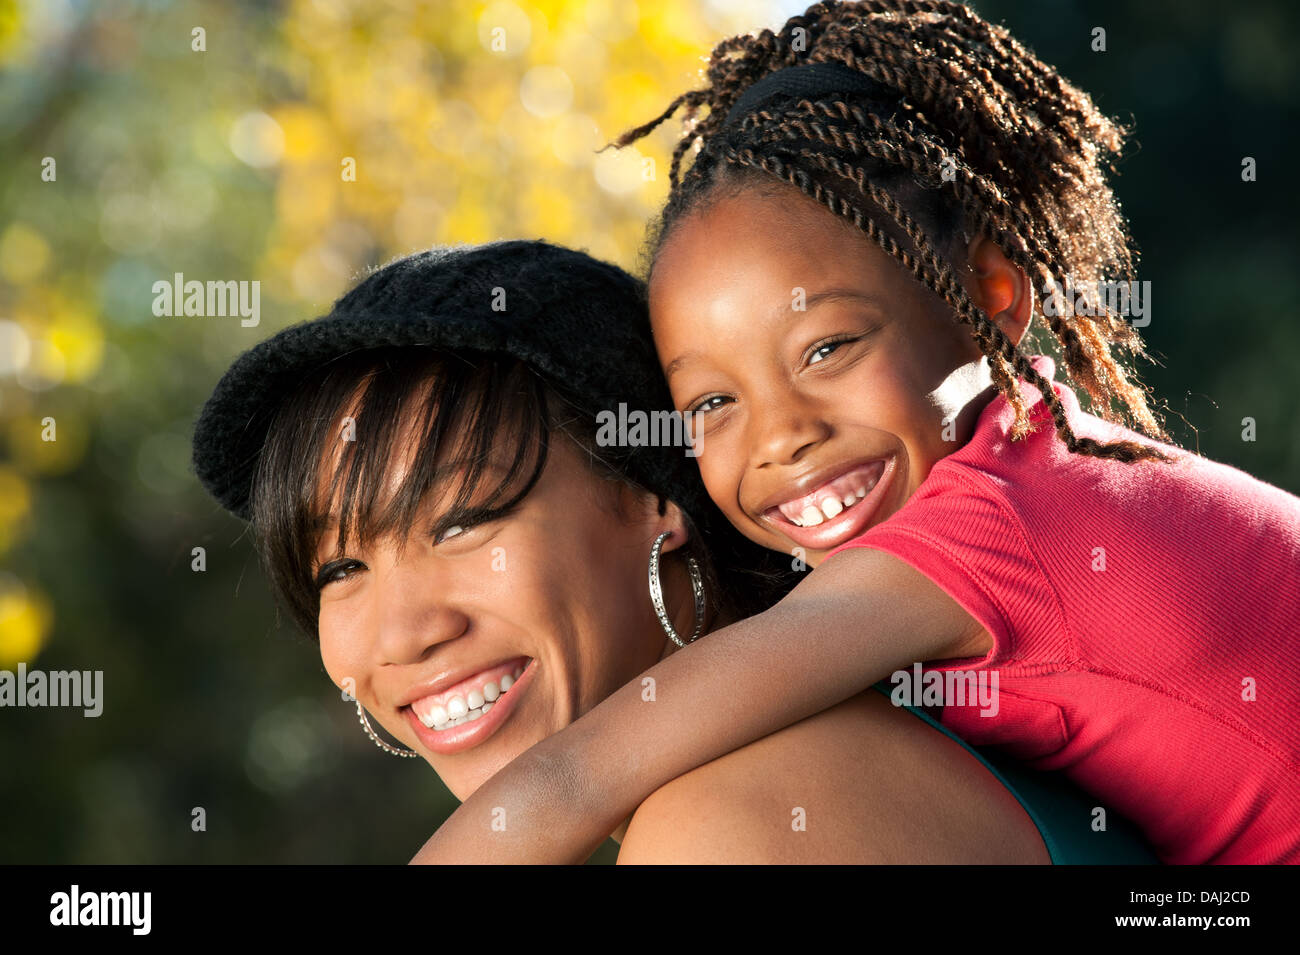 Happy African American mother and child having fun spending time together in a park Stock Photo